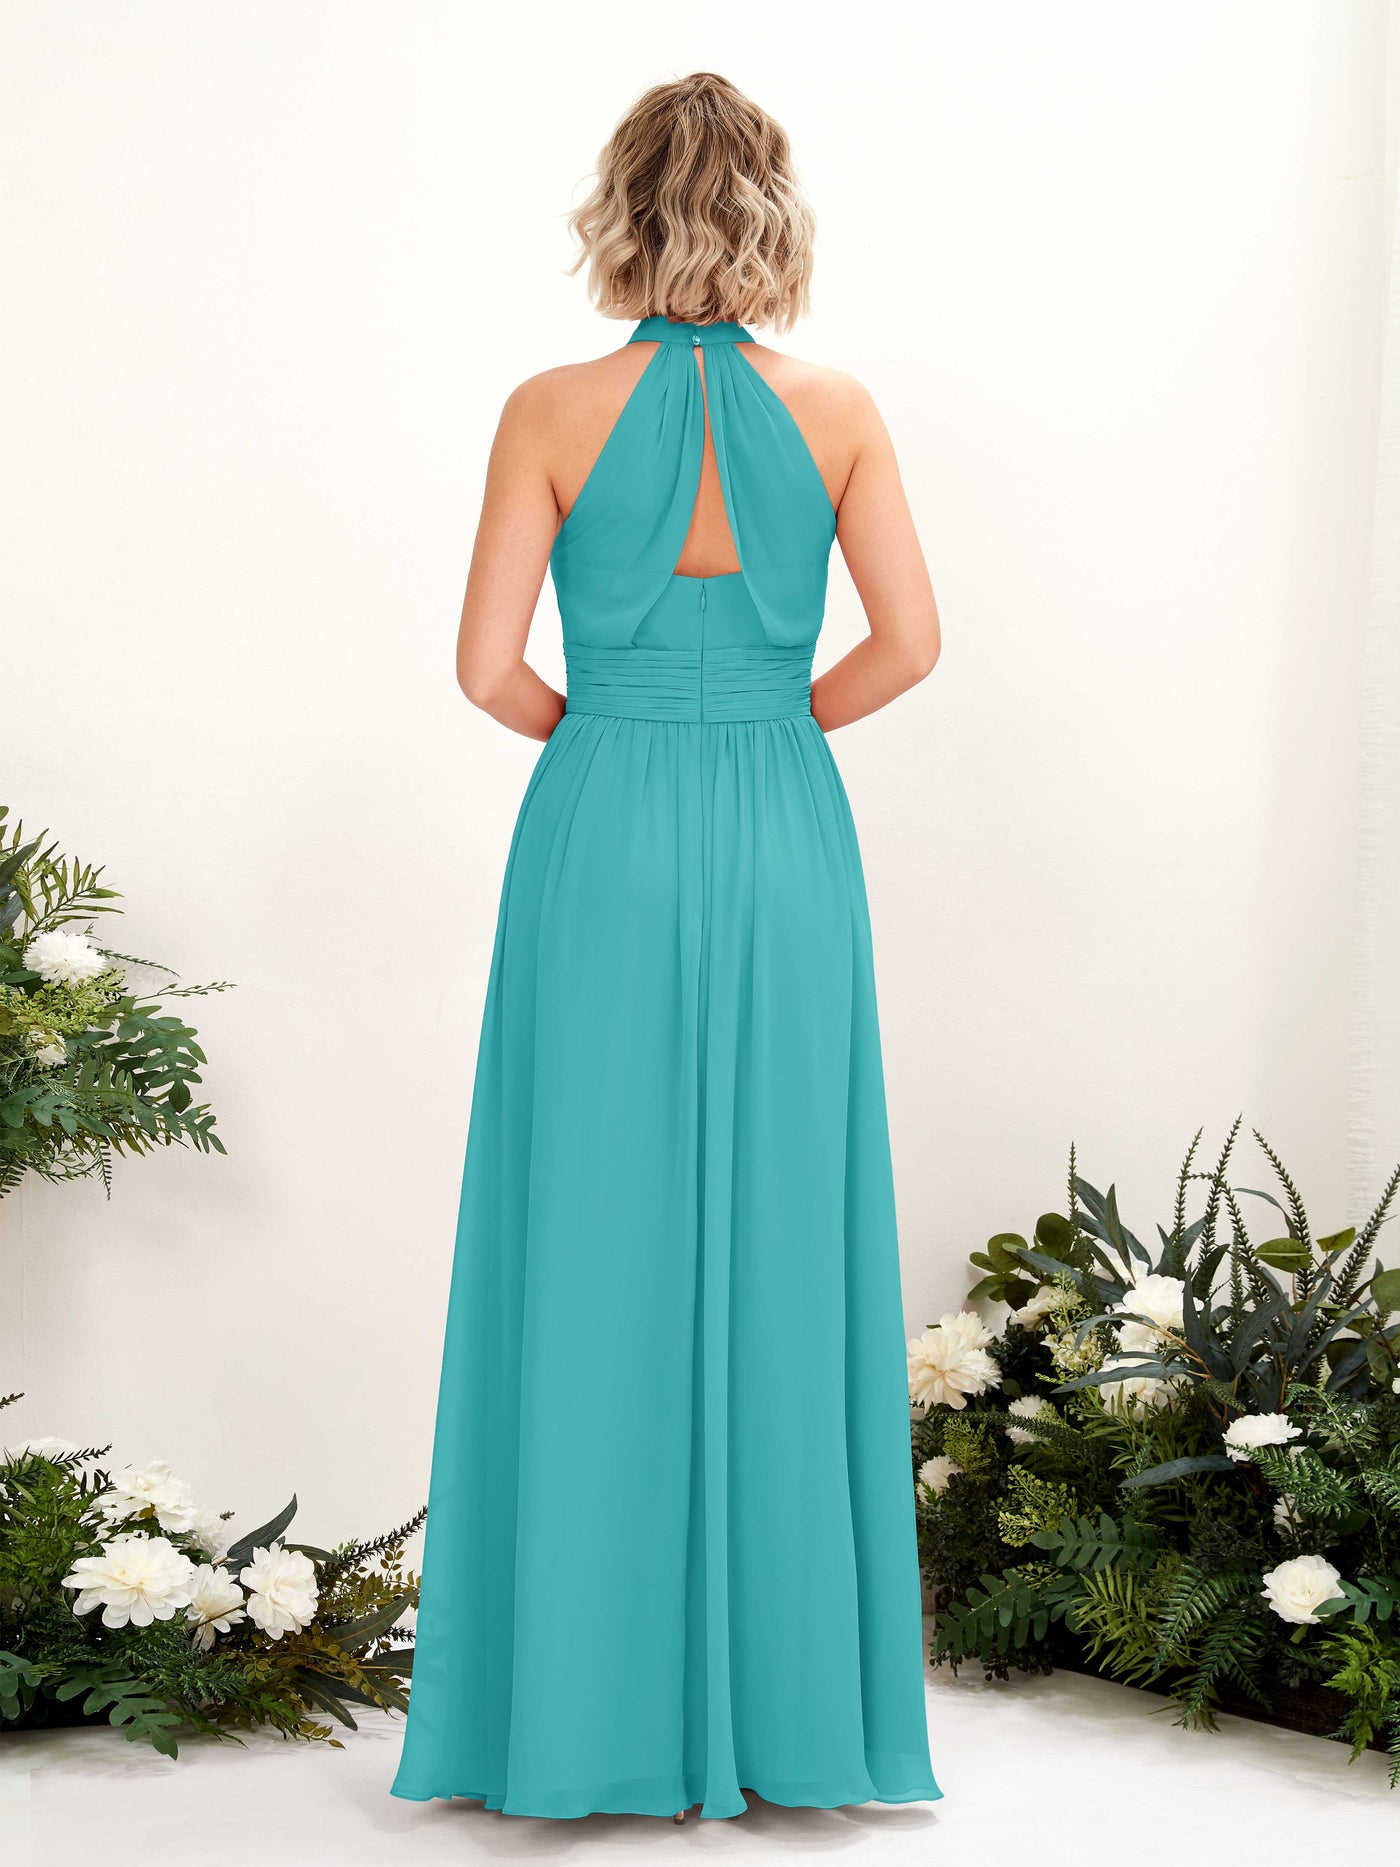 Turquoise Bridesmaid Dresses Bridesmaid Dress A-line Chiffon Halter Full Length Sleeveless Wedding Party Dress (81225323)#color_turquoise